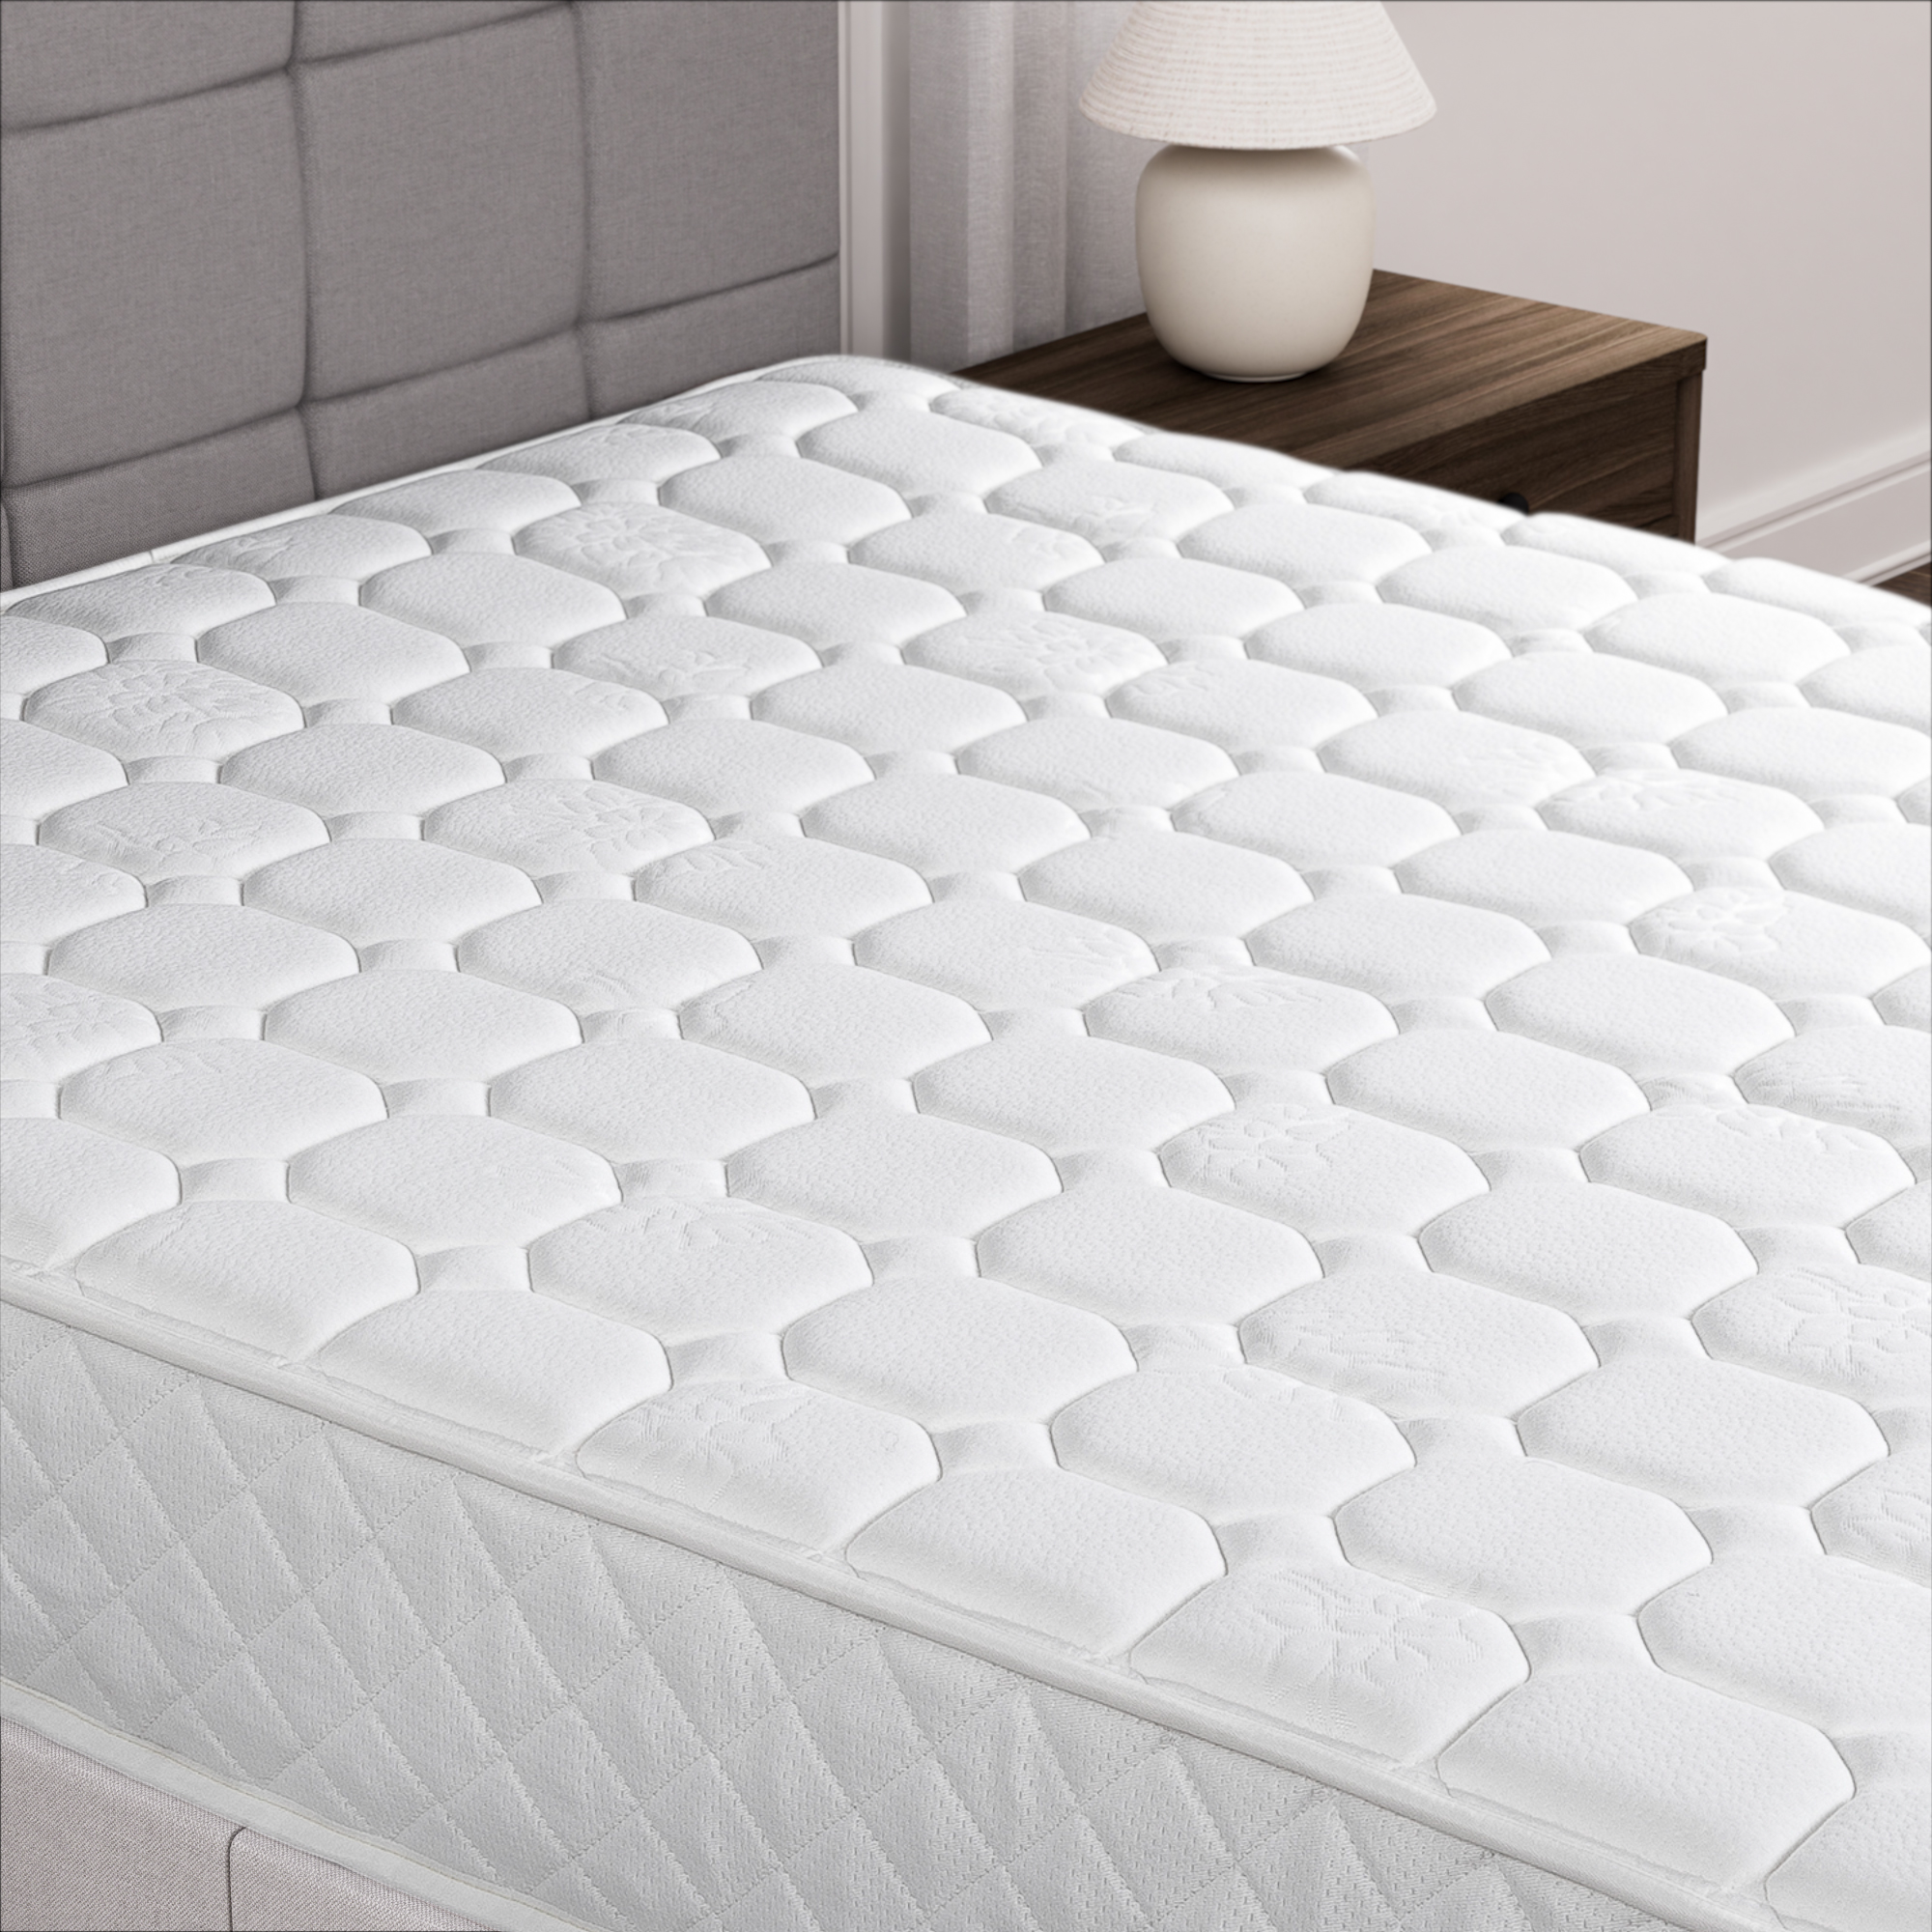 8" Quilted Hybrid of Comfort Foam and Pocket Spring Mattress, Full - image 3 of 5